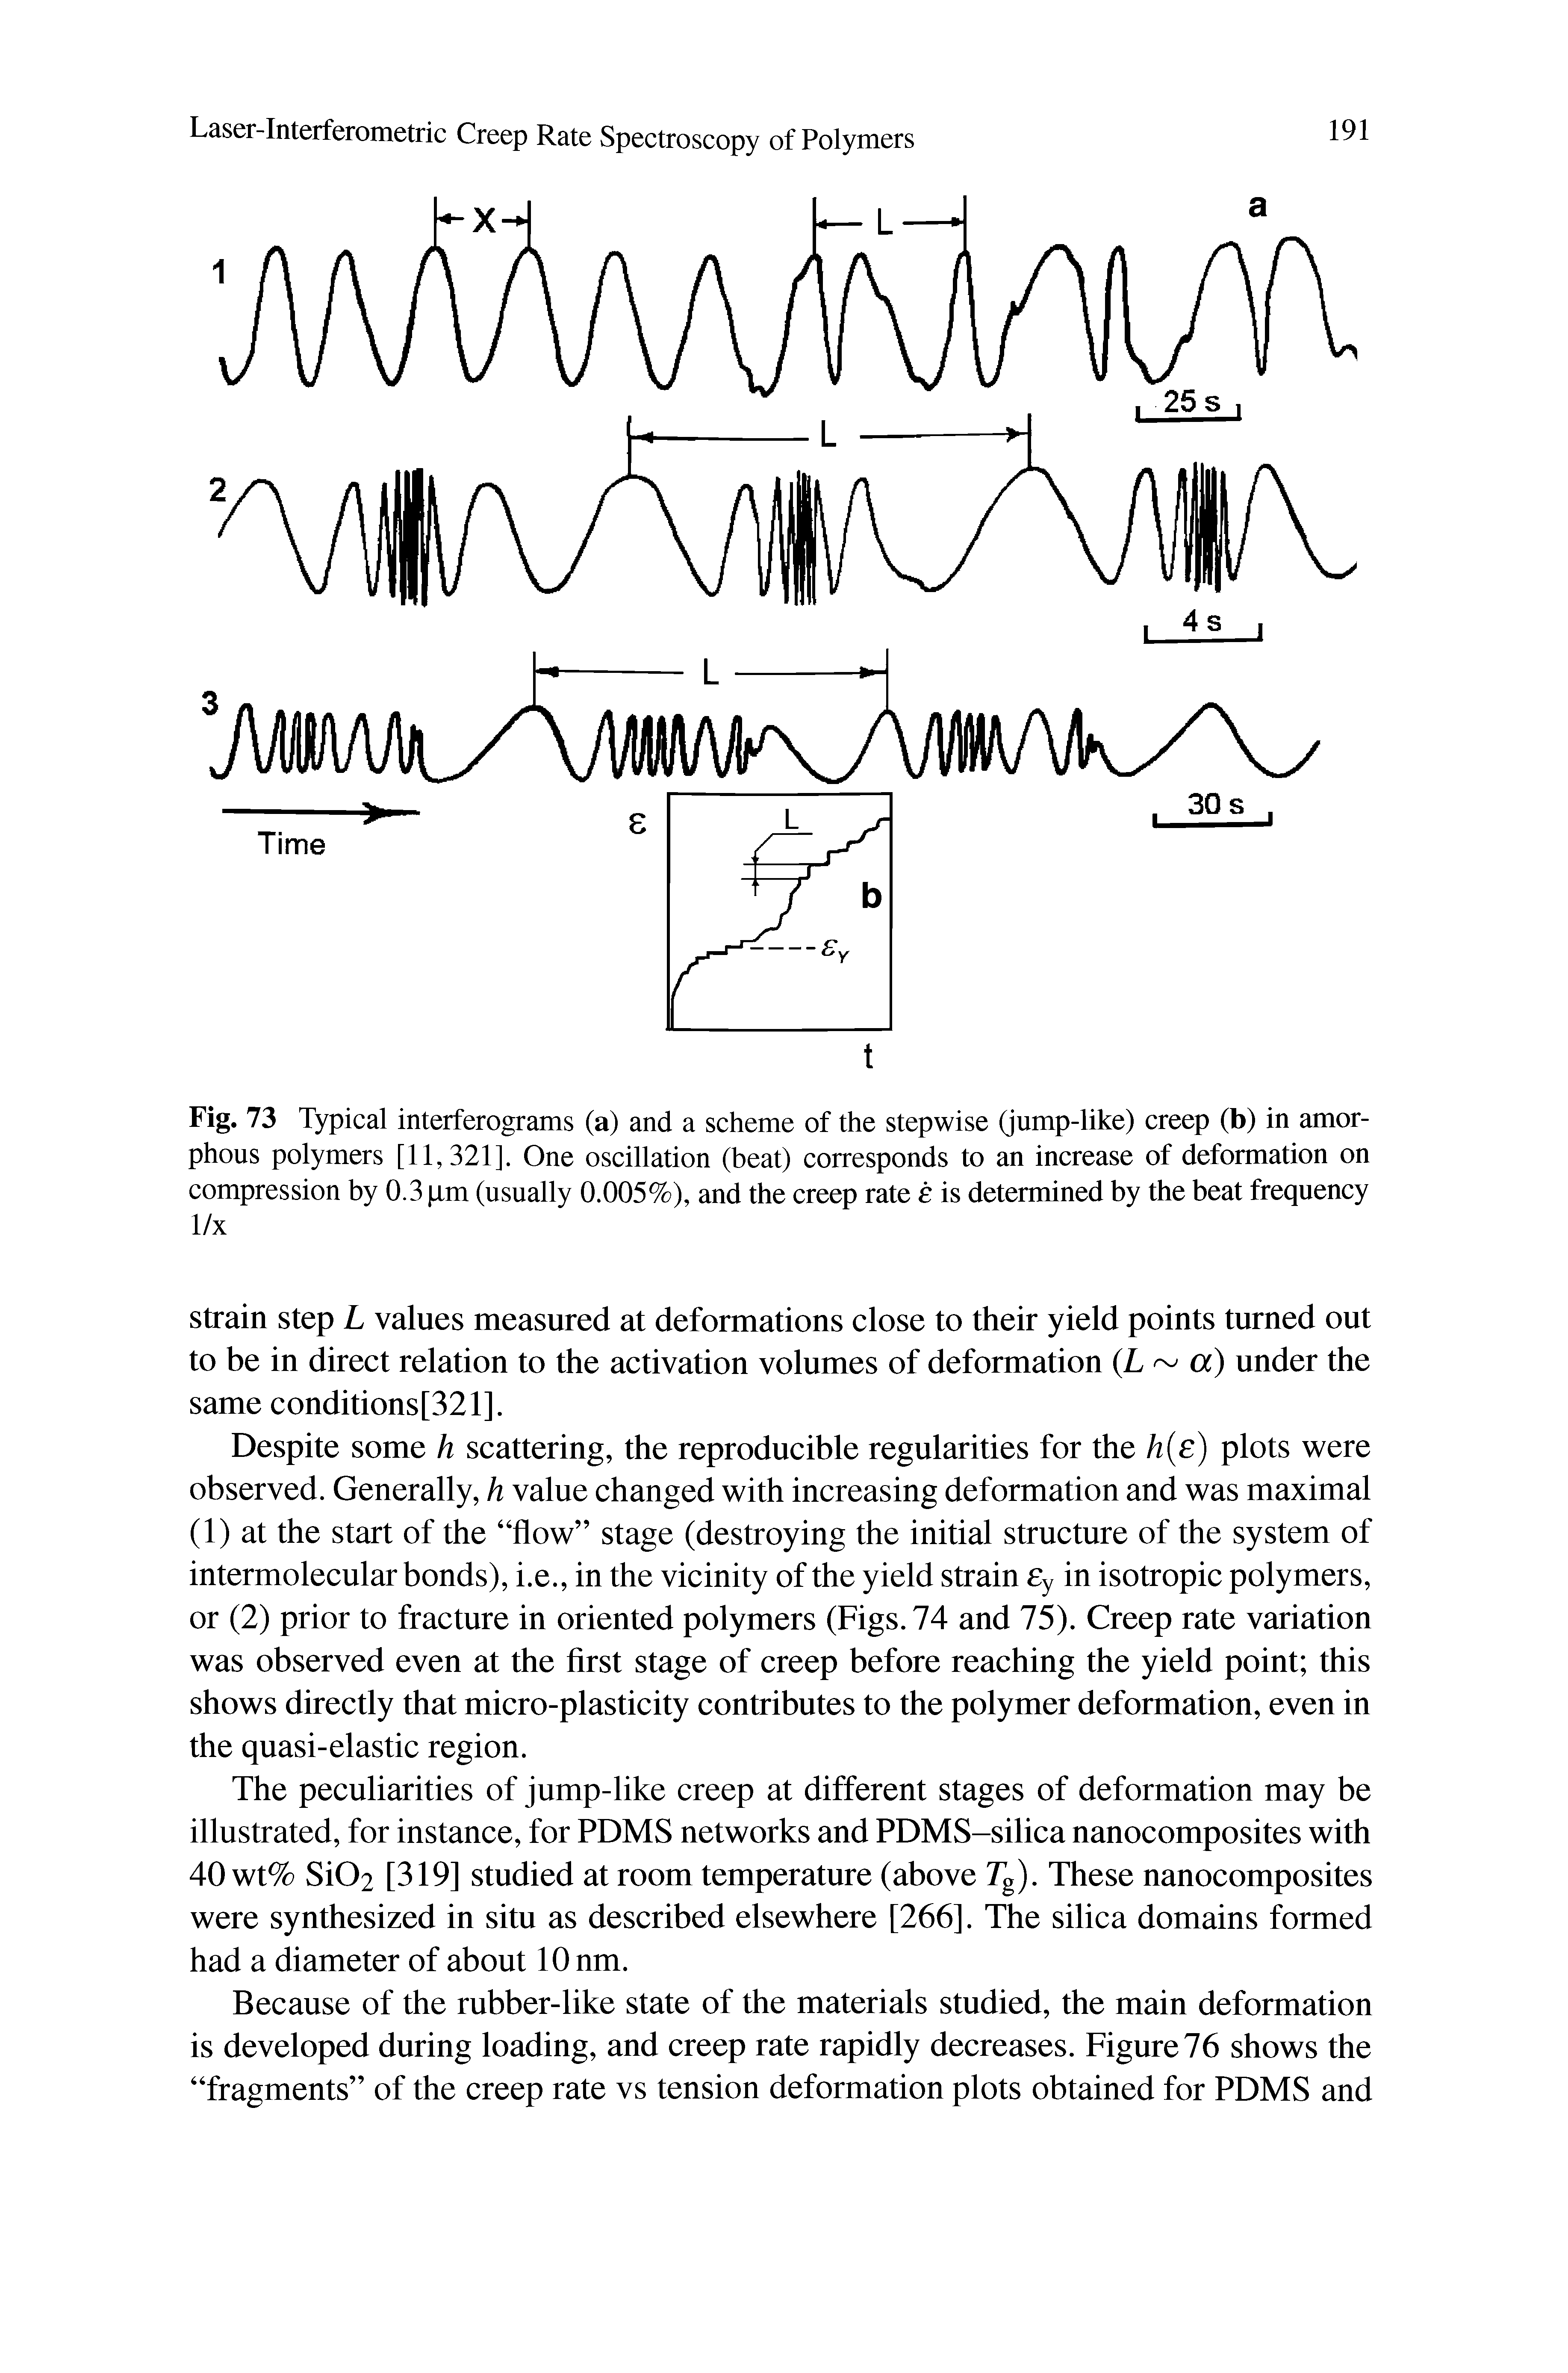 Fig. 73 Typical interferograms (a) and a scheme of the stepwise (jump-like) creep (b) in amorphous polymers [11,321]. One oscillation (beat) corresponds to an increase of deformation on compression by 0.3 jam (usually 0.005%), and the creep rate e is determined by the beat frequency 1/x...